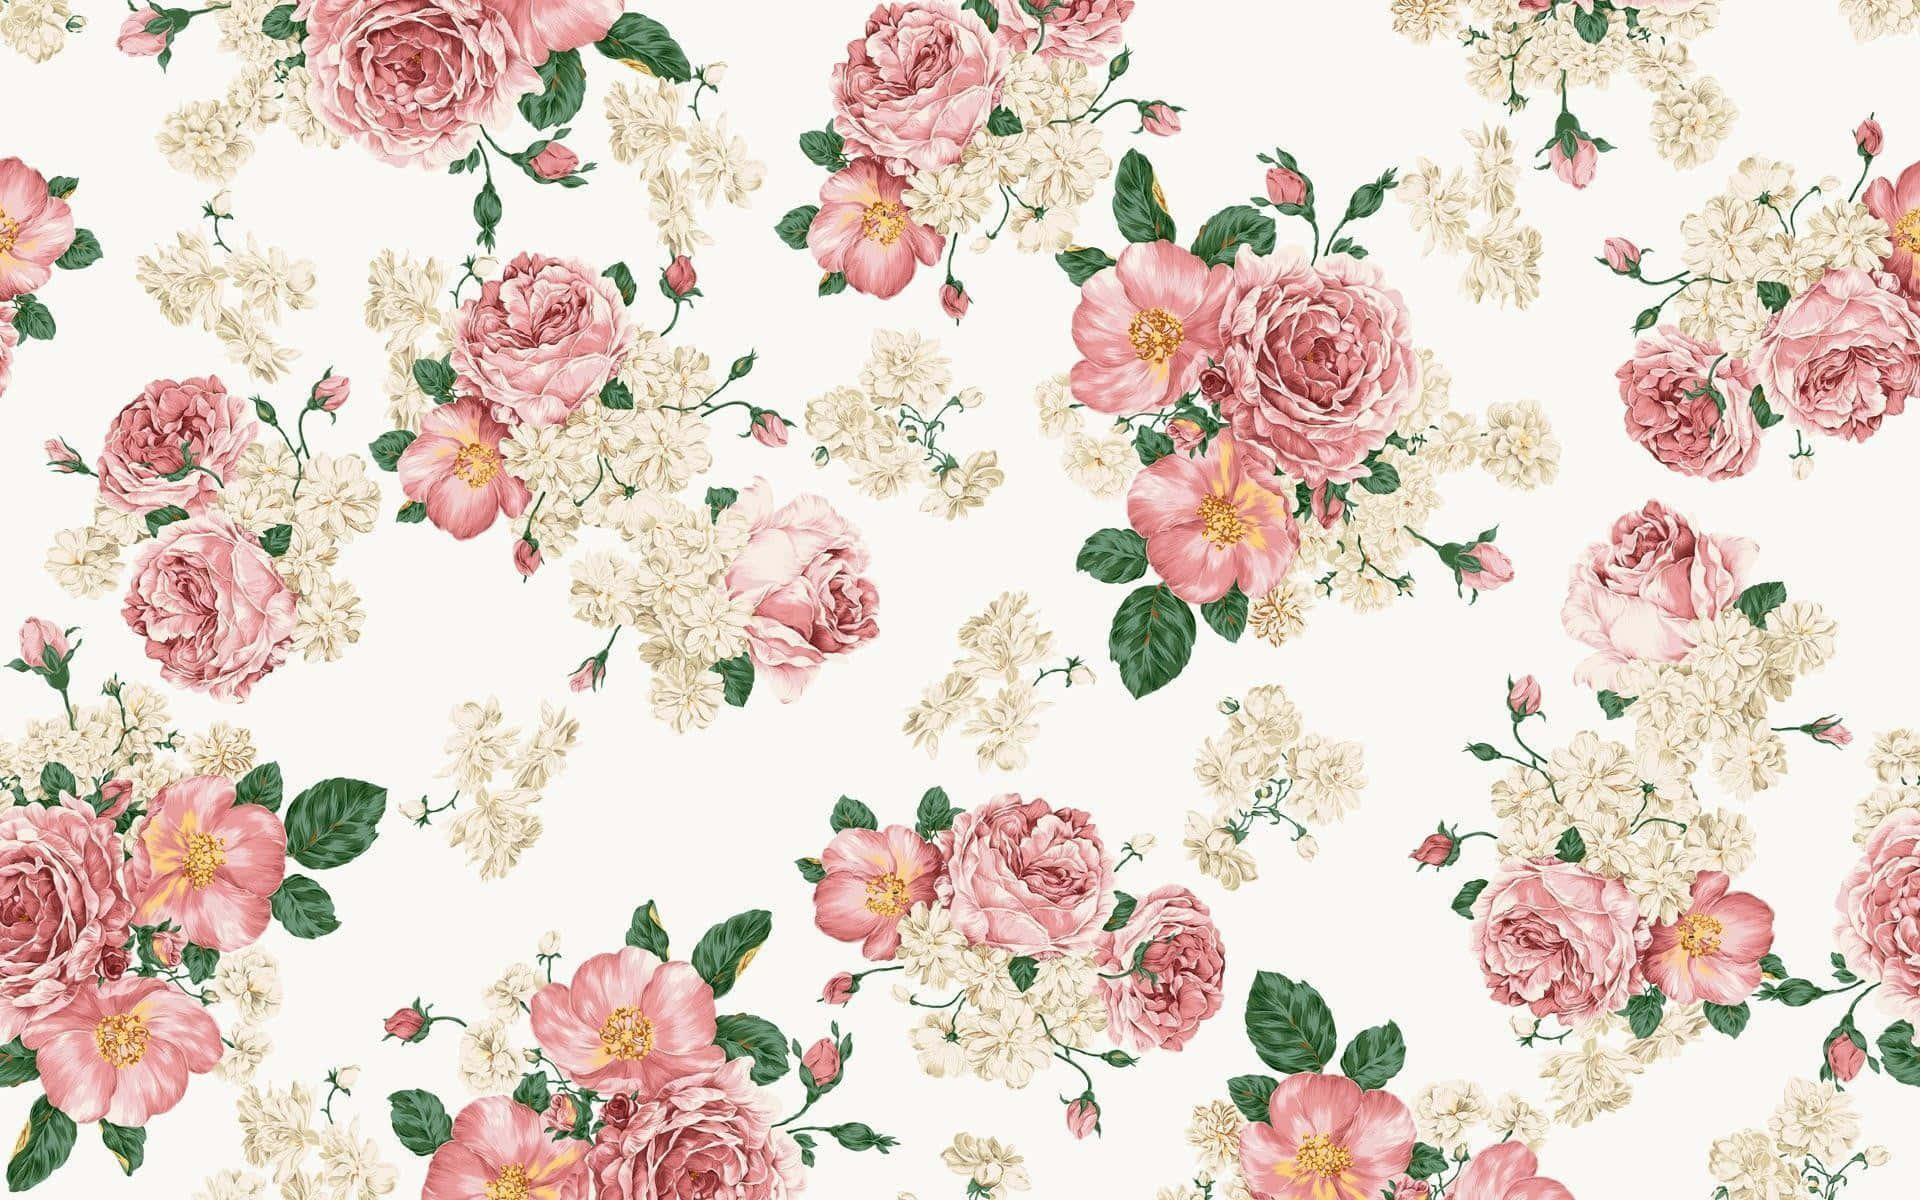 Unconventional and Chic – Floral Computer Wallpaper